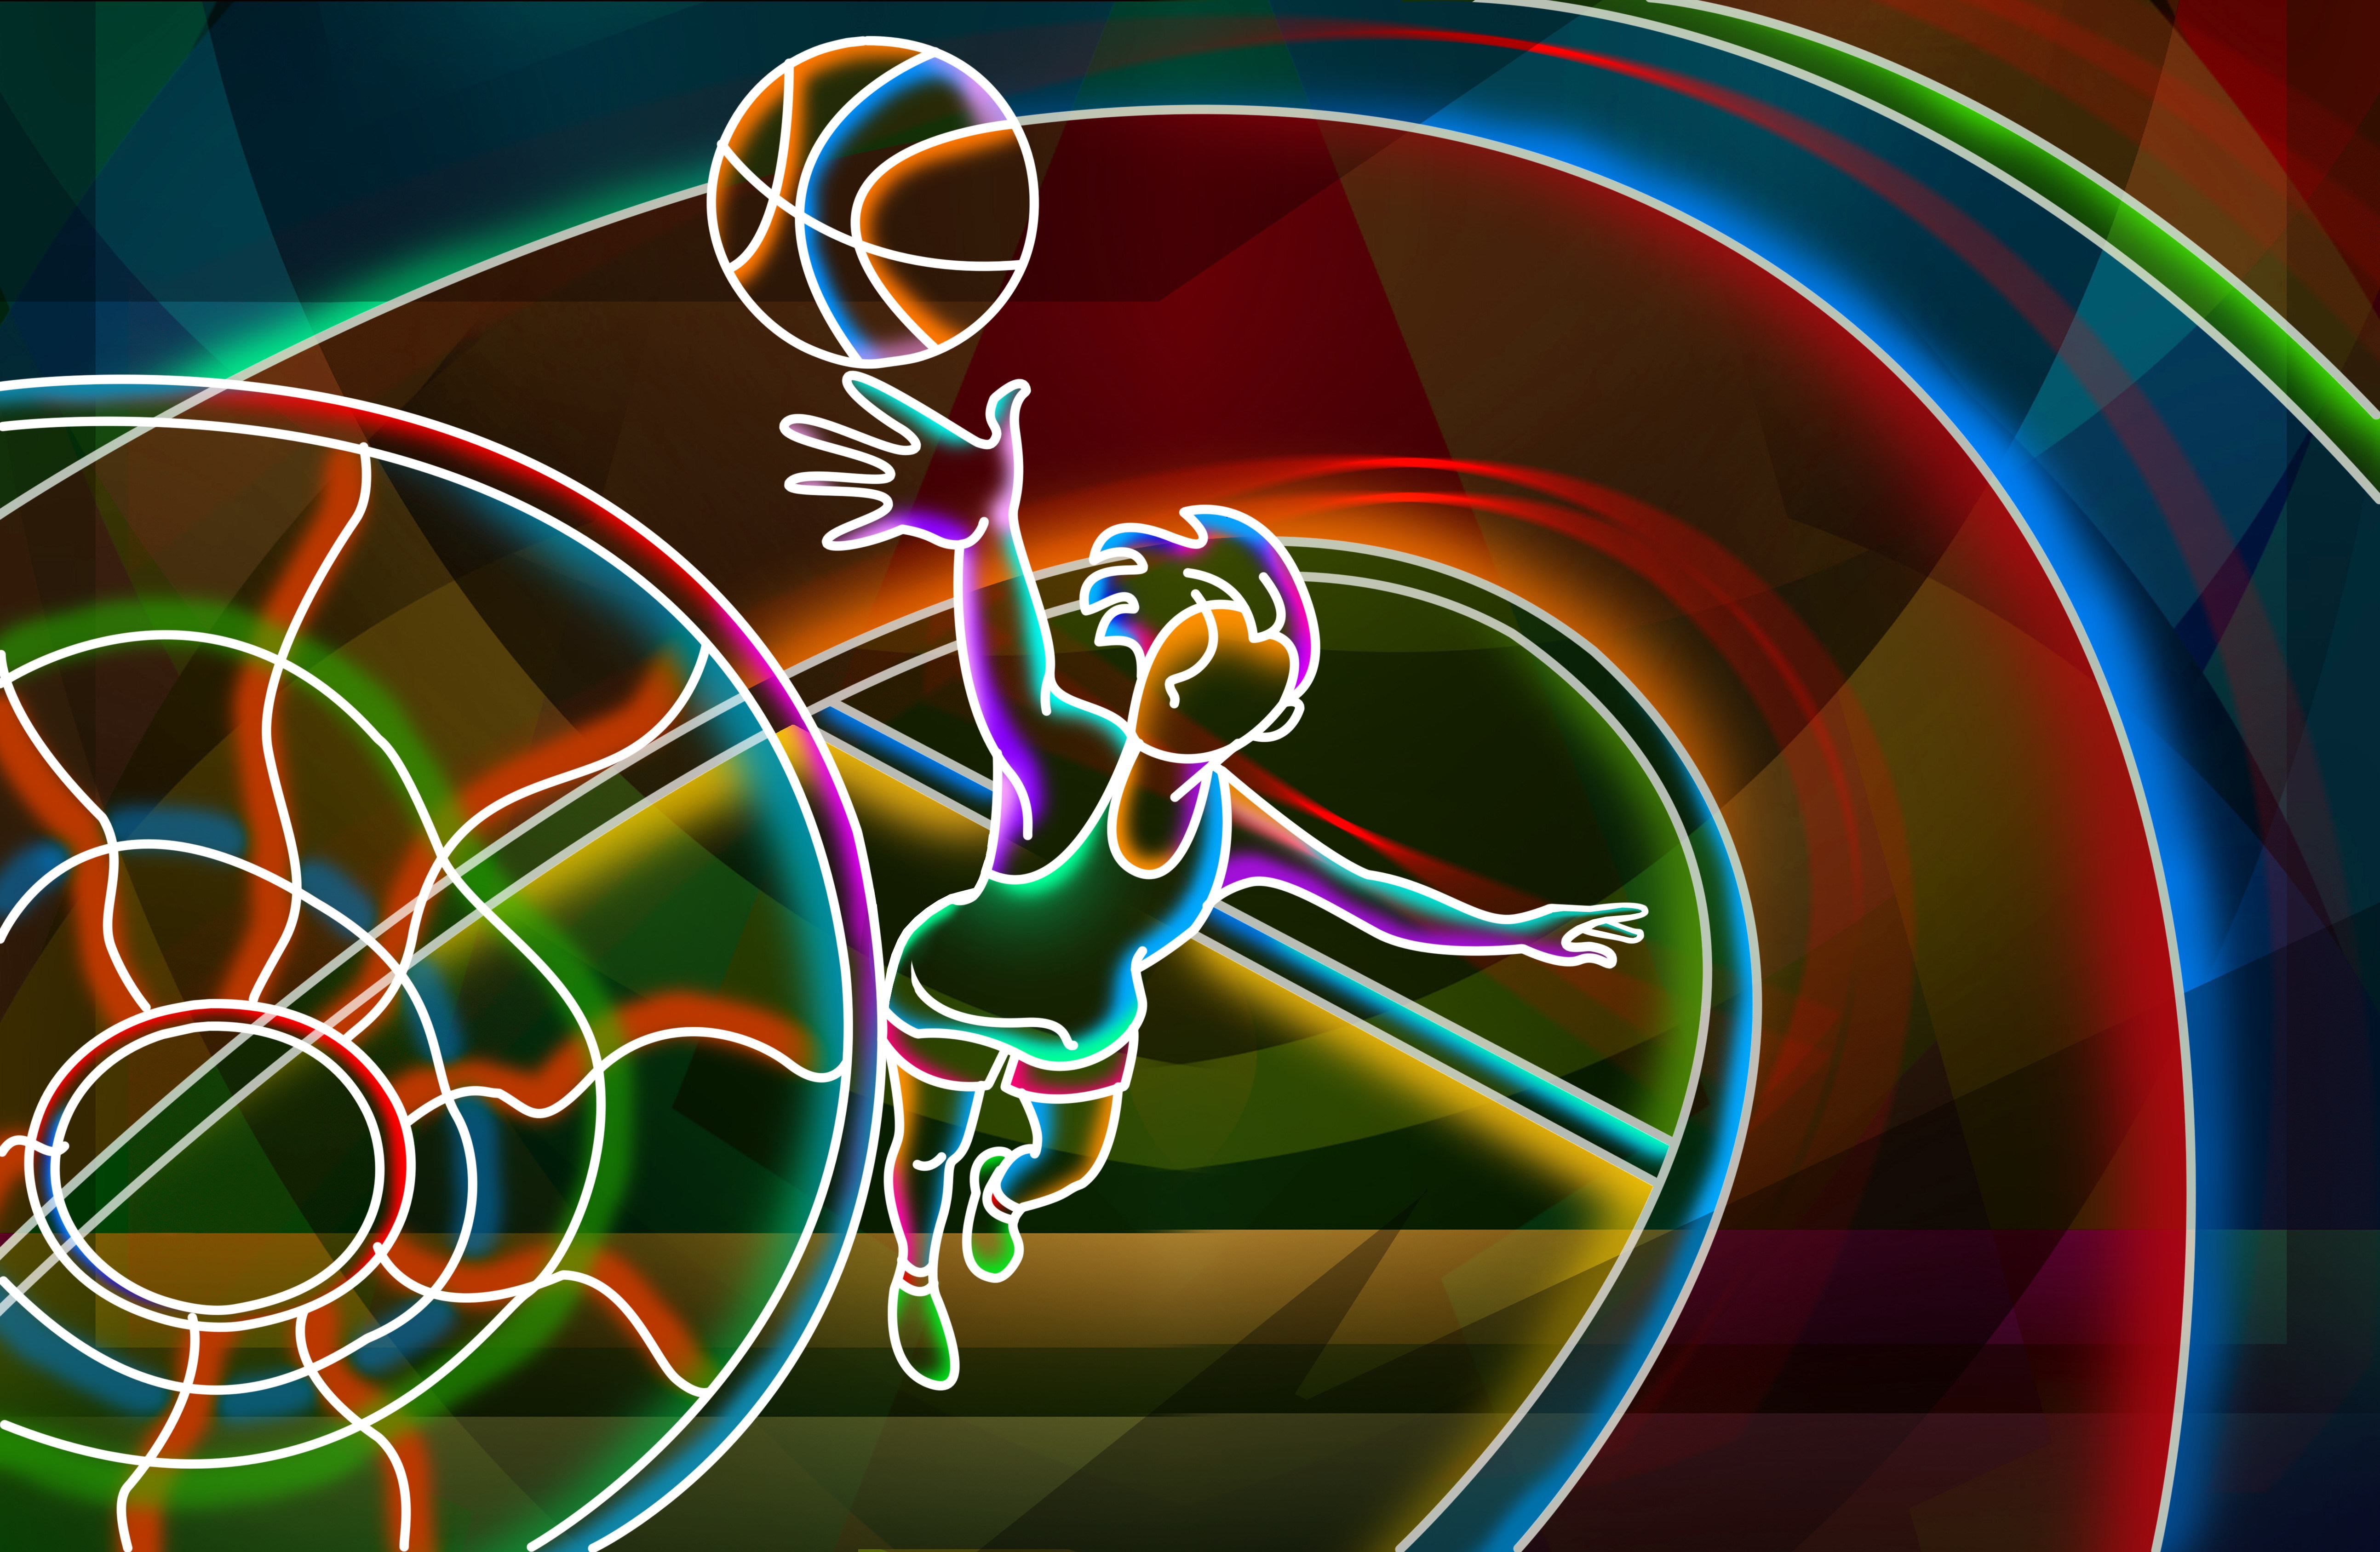 Basketball player wallpapers and images - wallpapers ...